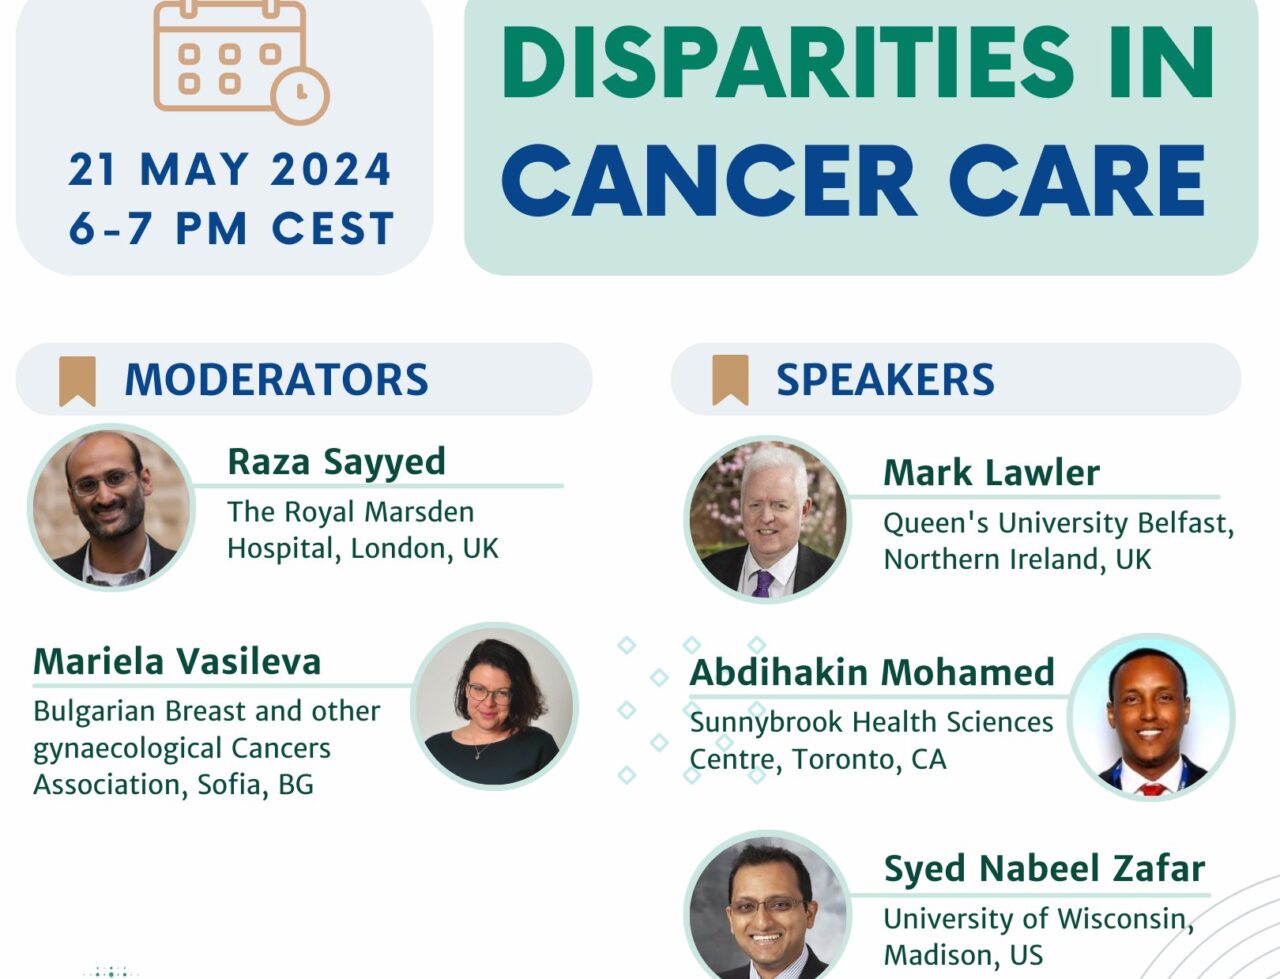 Coming up next week! European Society of Surgical Oncology Webinar on Dispairities in Cancer Care